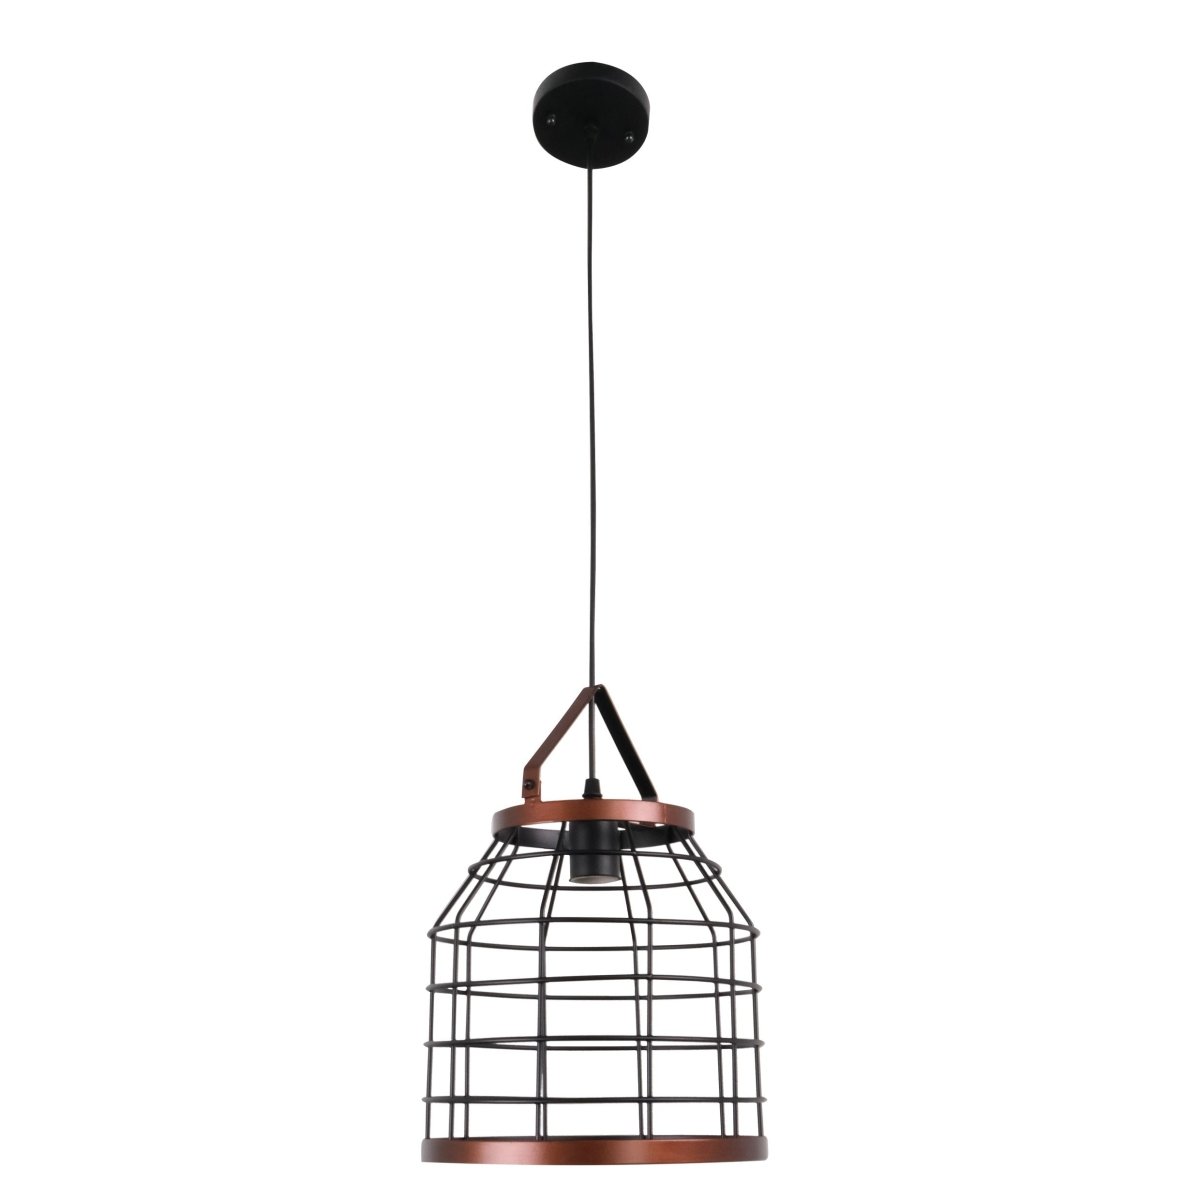 Main image of Black Cage Metal Pendant Light with E27 Fitting | TEKLED 156-19514